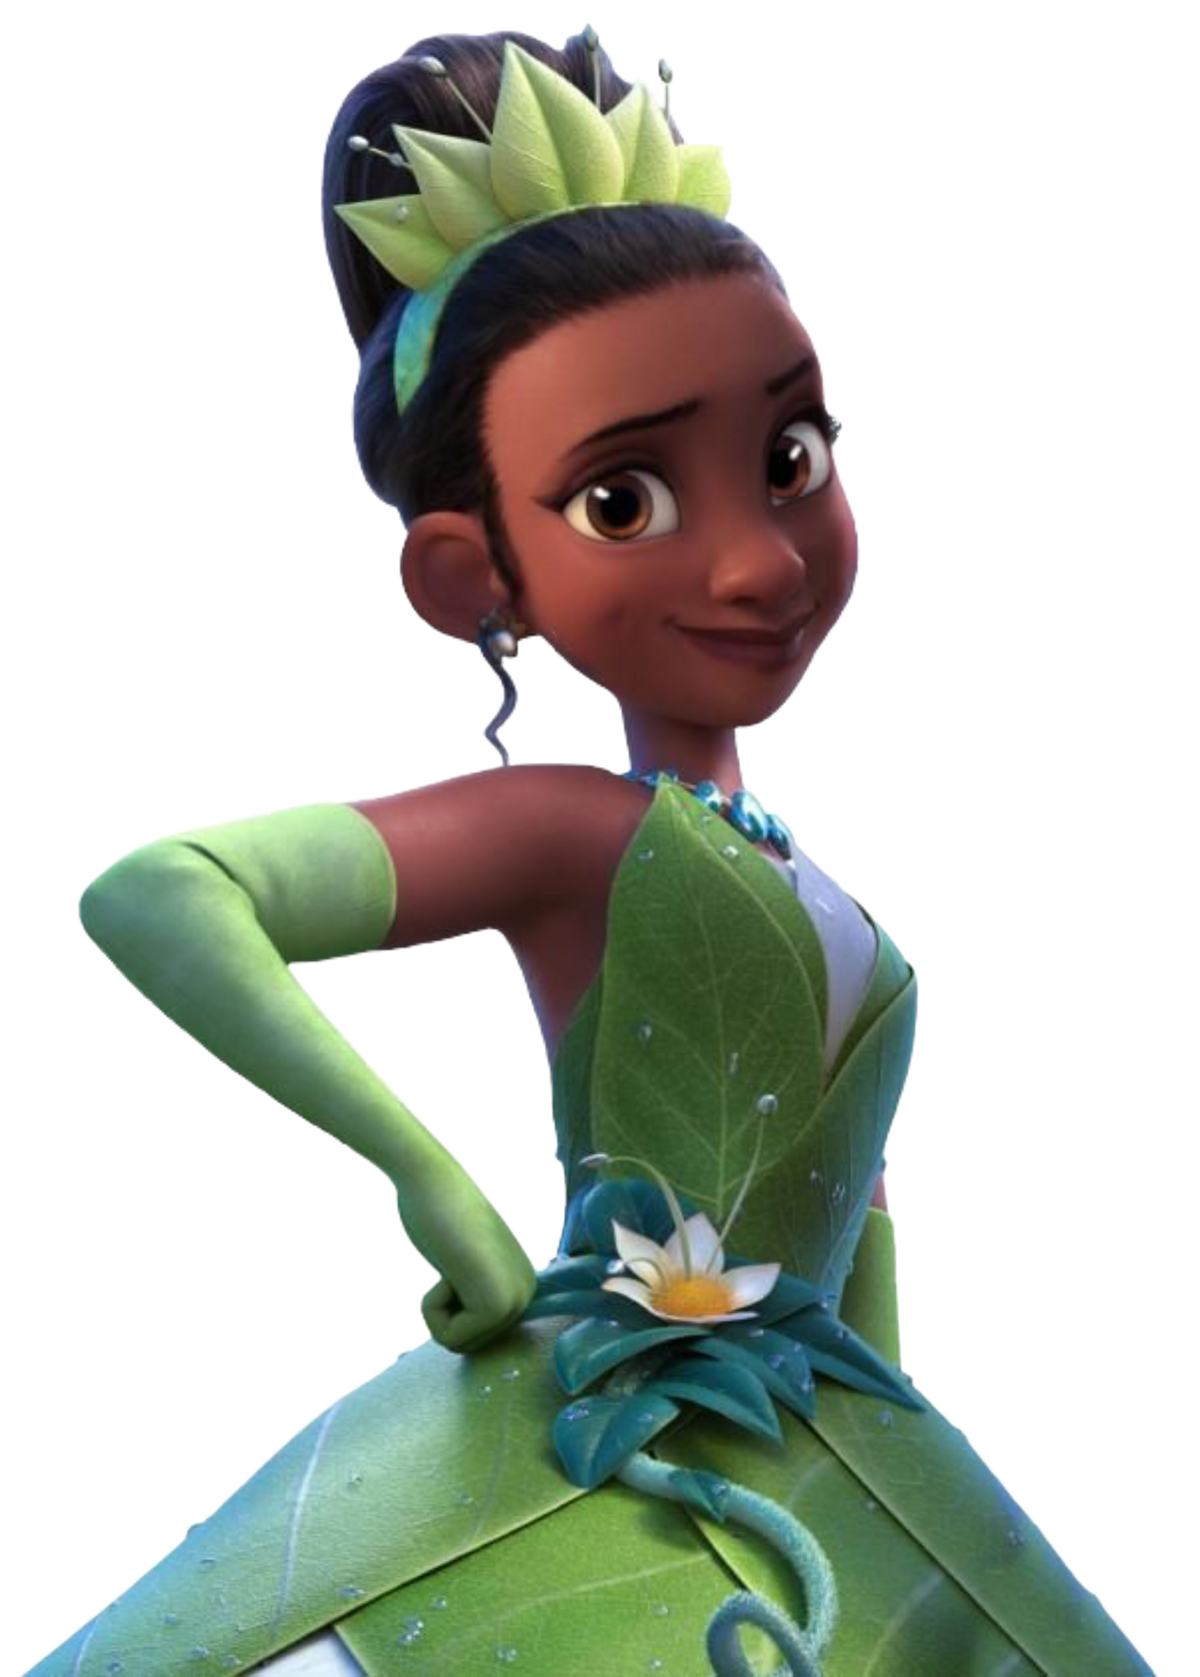 https://static.wikia.nocookie.net/fabulous-character-kingdoms/images/9/96/Queen_Tiana_of_Maldonia_Quad_HD.png/revision/latest/scale-to-width-down/1200?cb=20211018223110